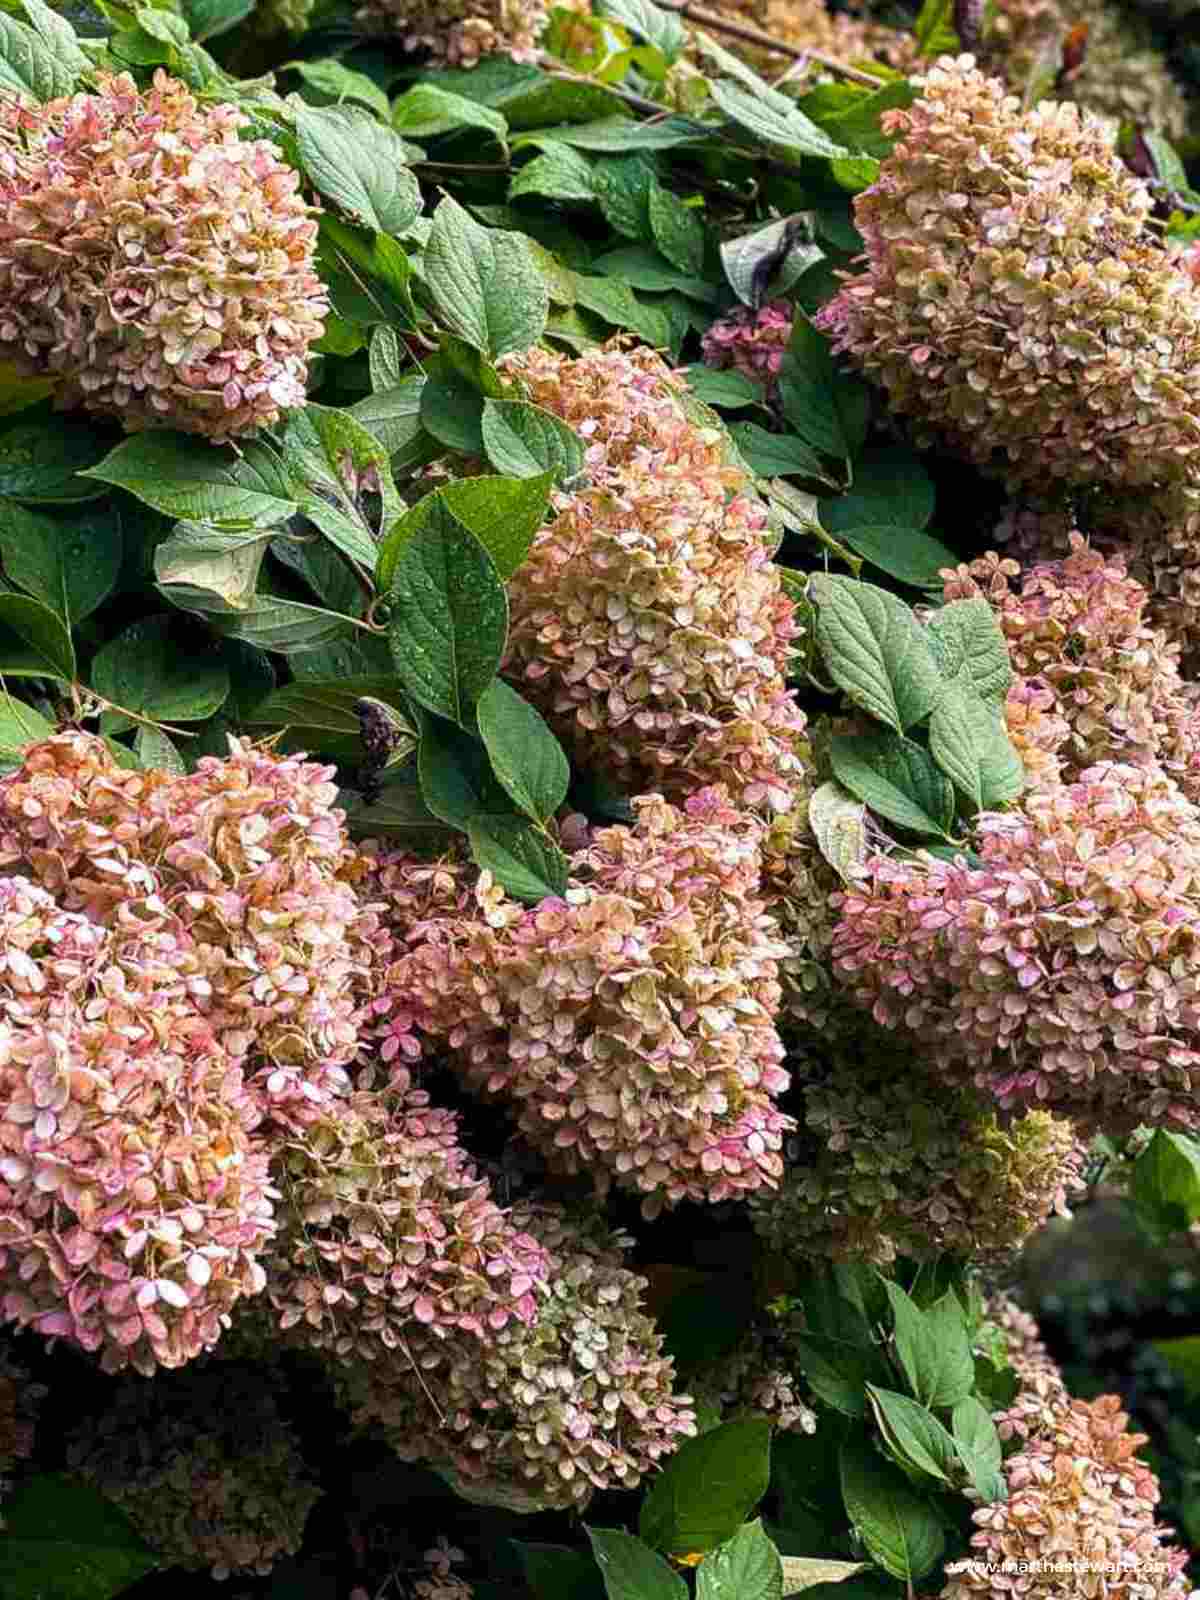 How To Grow and Care for an Oakleaf Hydrangea